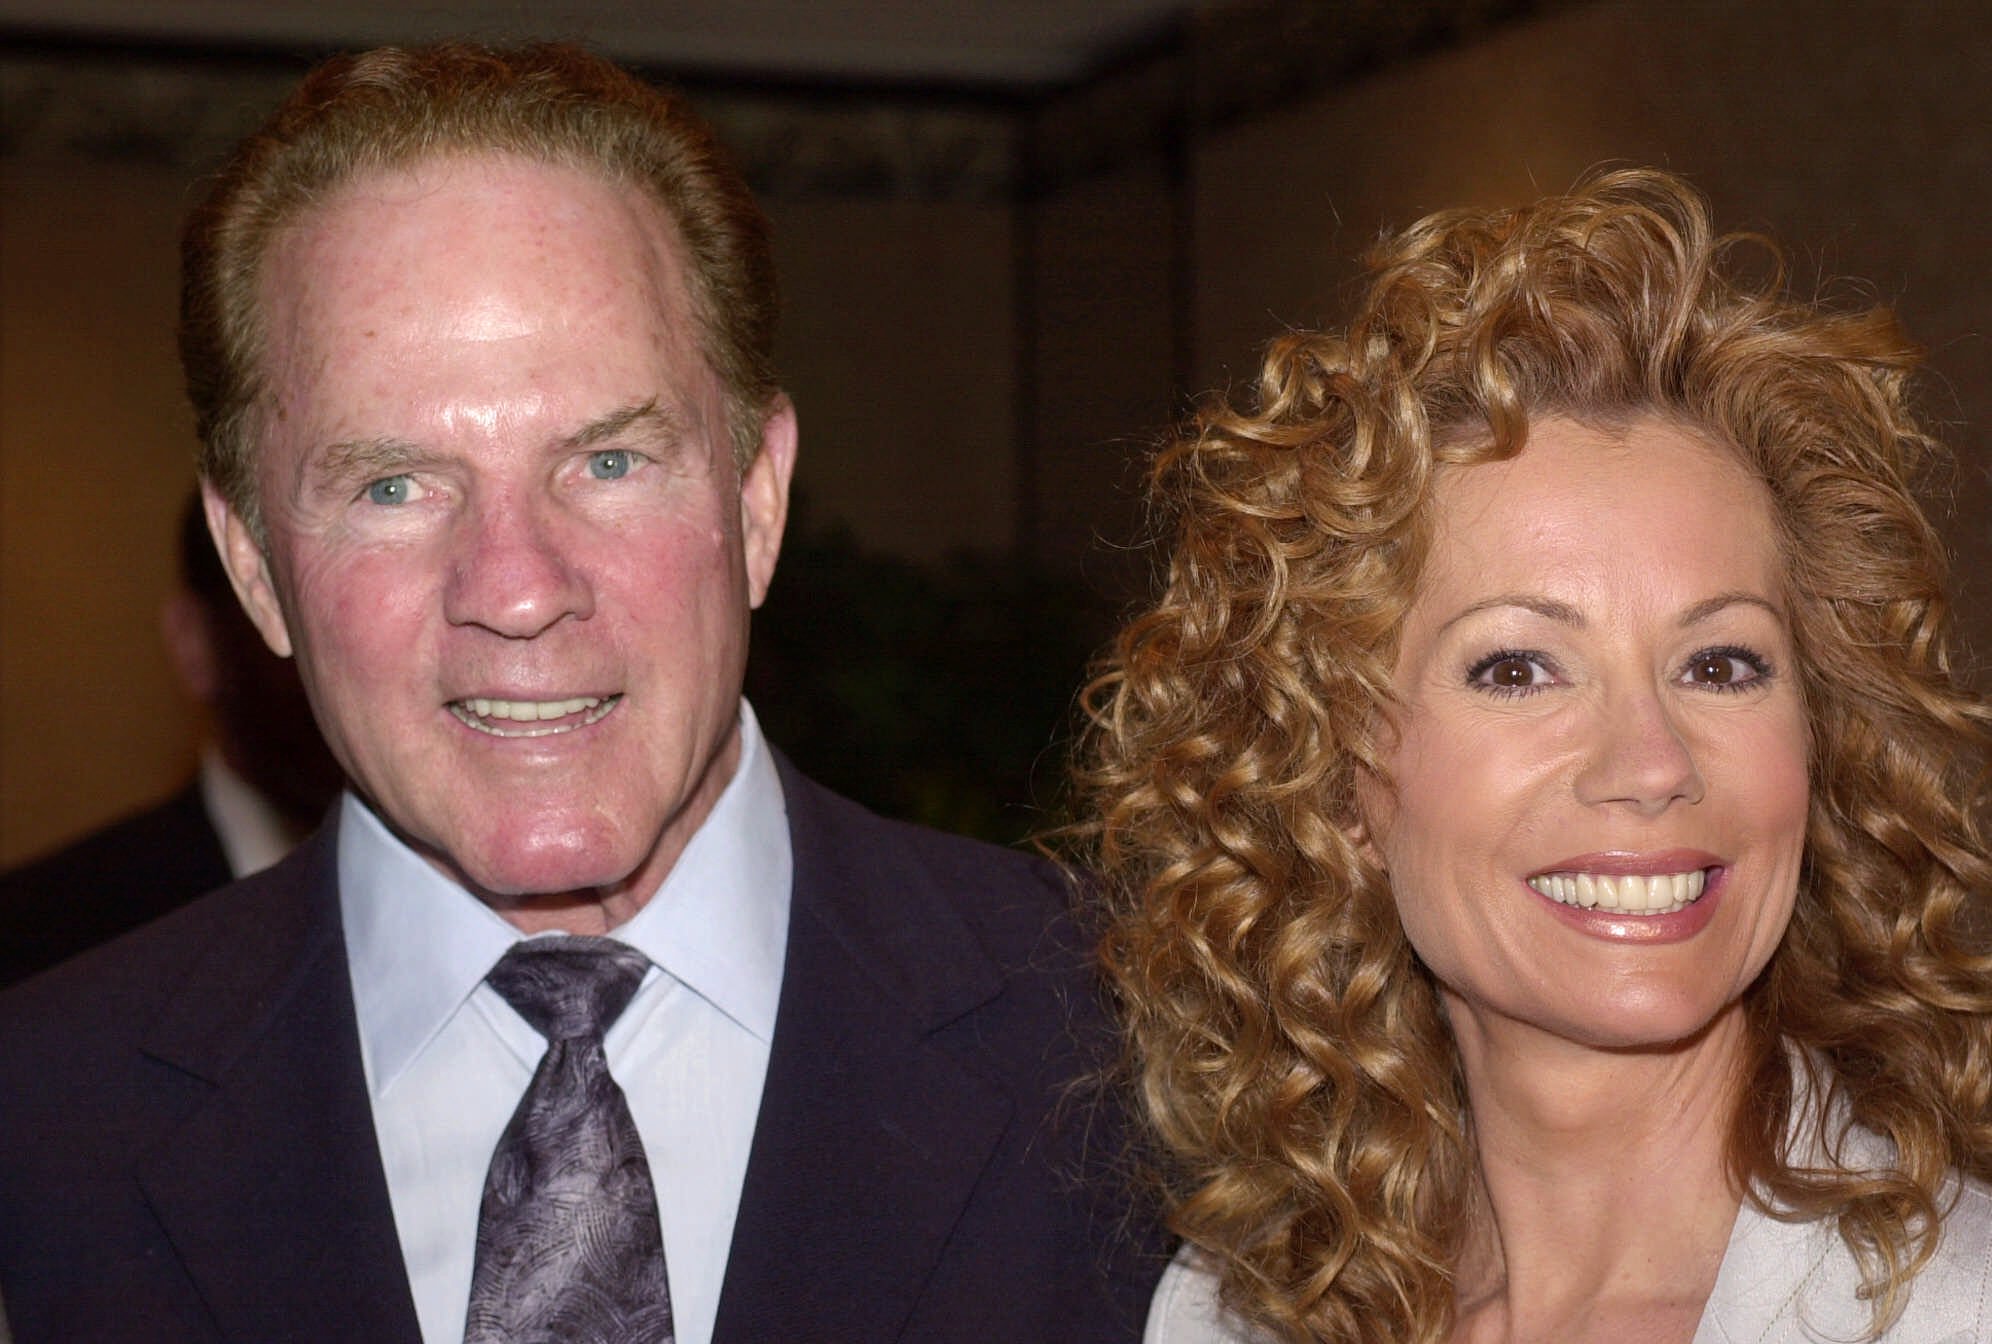 <p>If you watched "Live! With Regis and Kathie Lee" in the '90s, then you'd think from Kathie Lee Gifford's tales that she and husband Frank Gifford had a perfect marriage. Not so! In 1997, Frank had a weekend fling with a stewardess named Suzen Johnson after meeting her on a flight a few months prior. Unbeknownst to Frank, Suzen had sold the story to The Globe, so the tabloid was documenting the romp. The Giffords weathered the media storm and were married until Frank's death in 2015.</p>